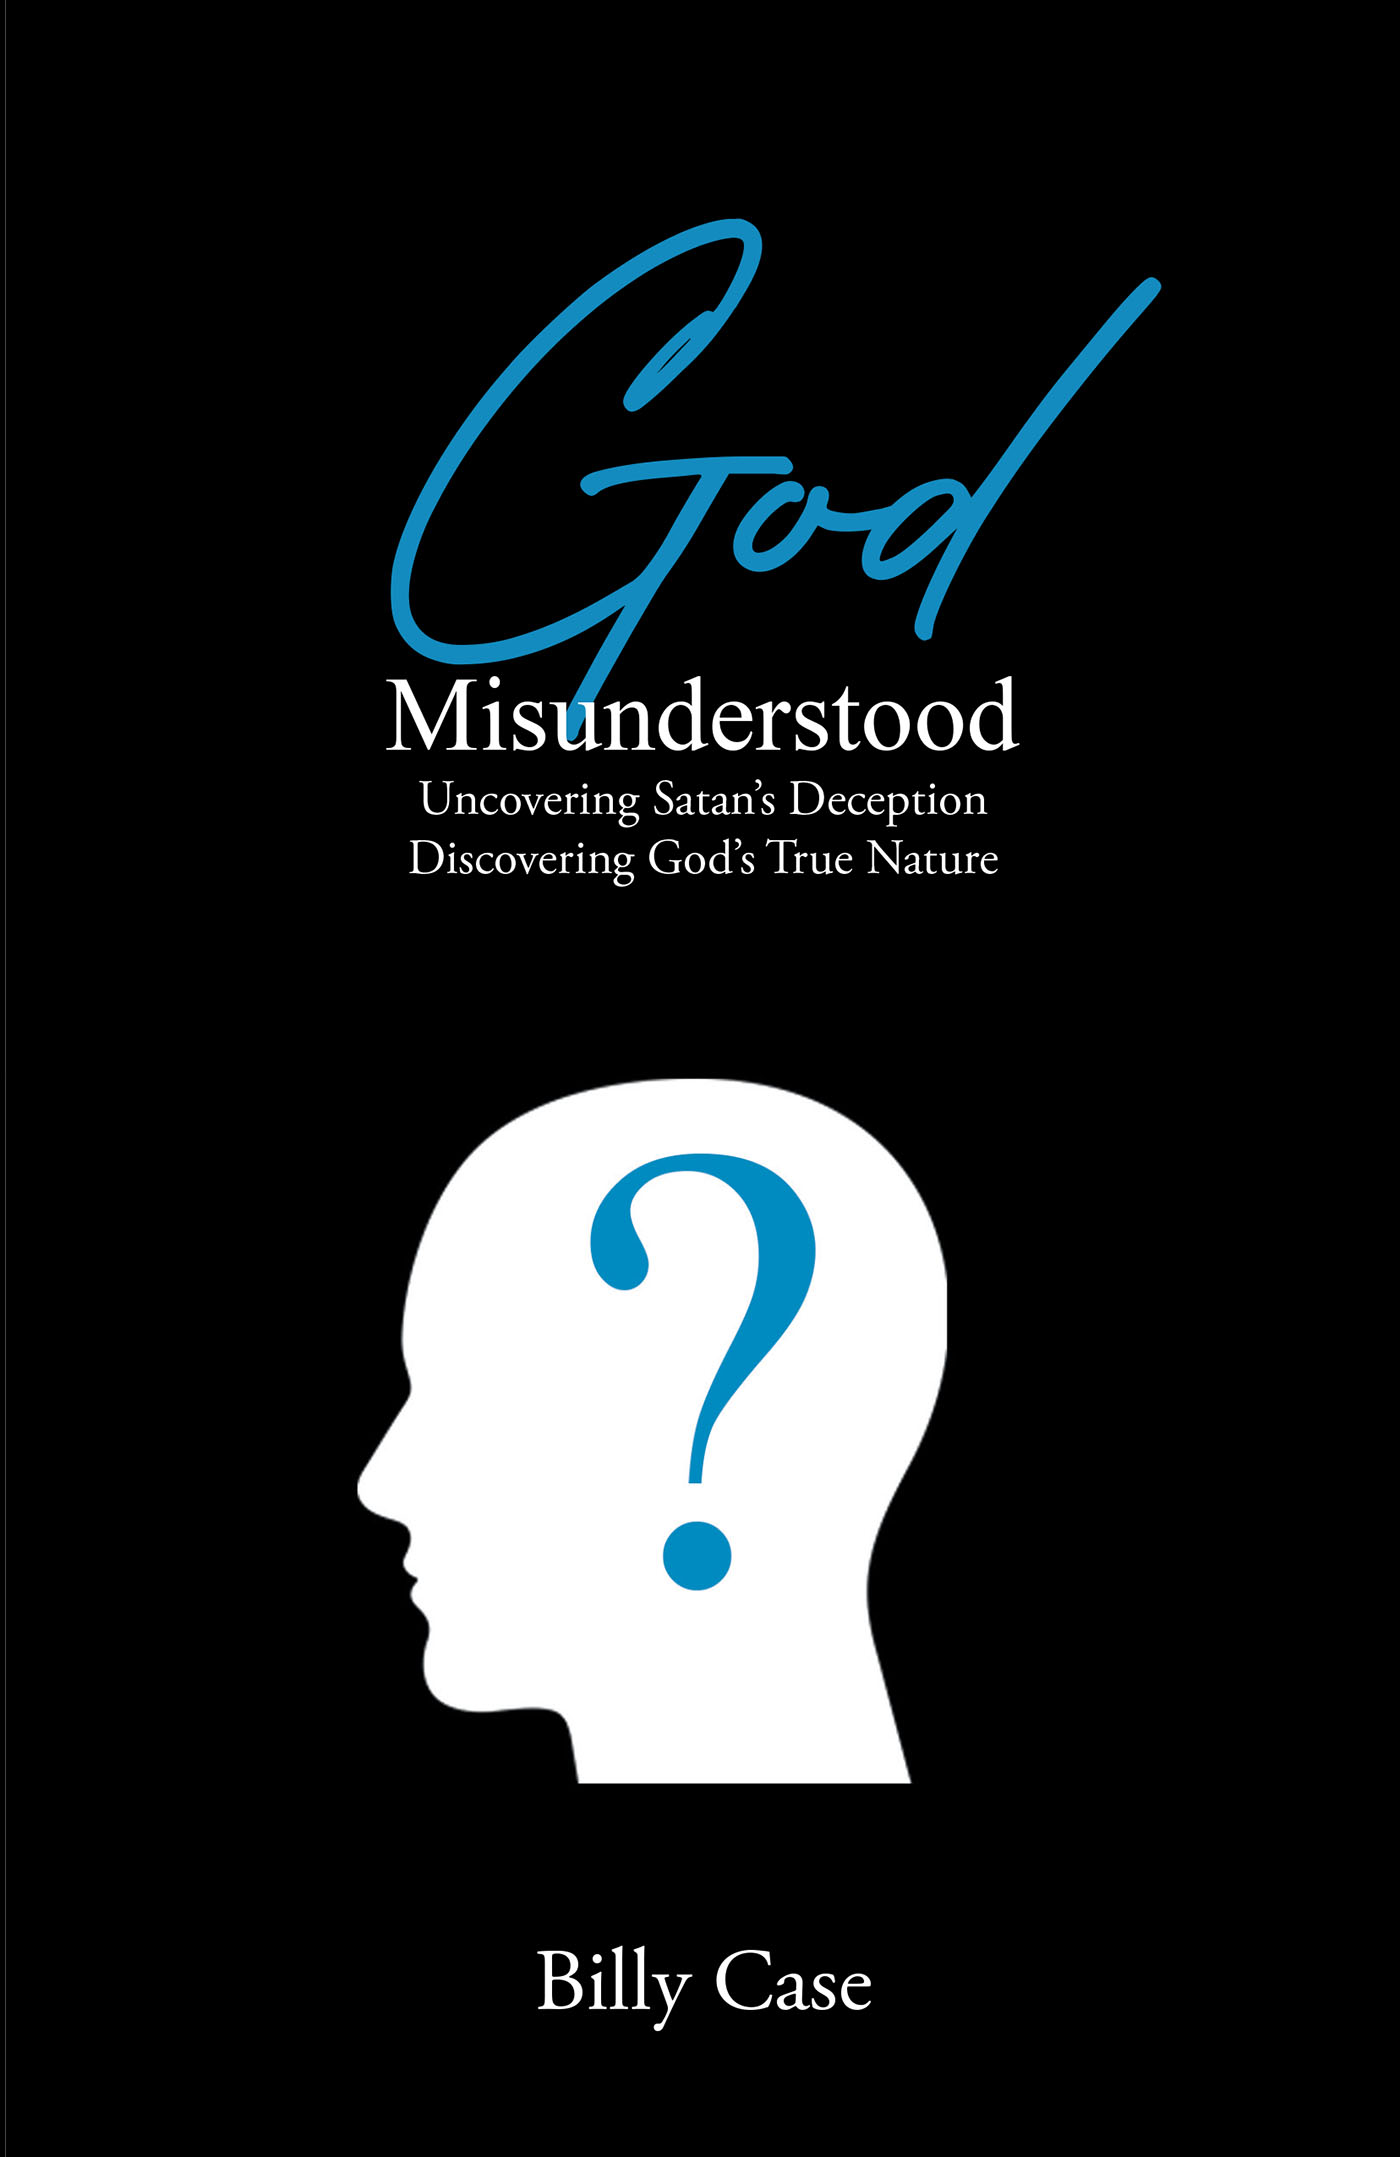 Billy Case’s Newly Released "God Misunderstood: Uncovering Satan’s Deception Discovering God’s True Nature" is an Encouraging Message of God’s Love